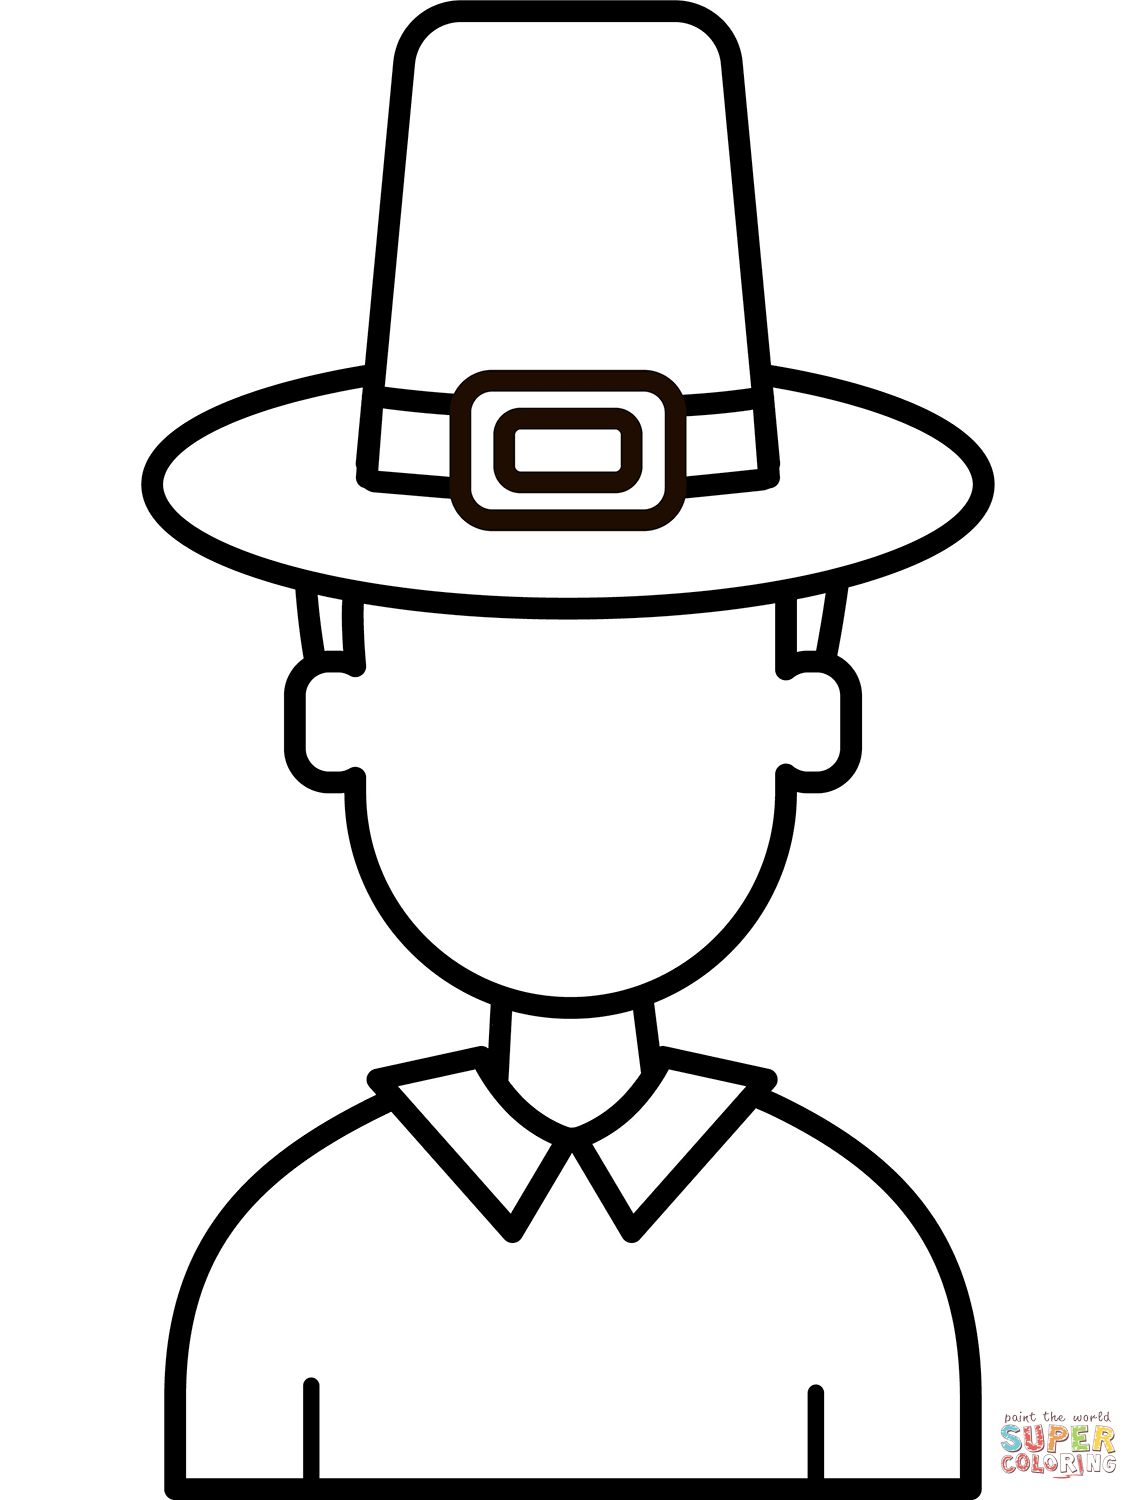 Pilgrim coloring page free printable coloring pages